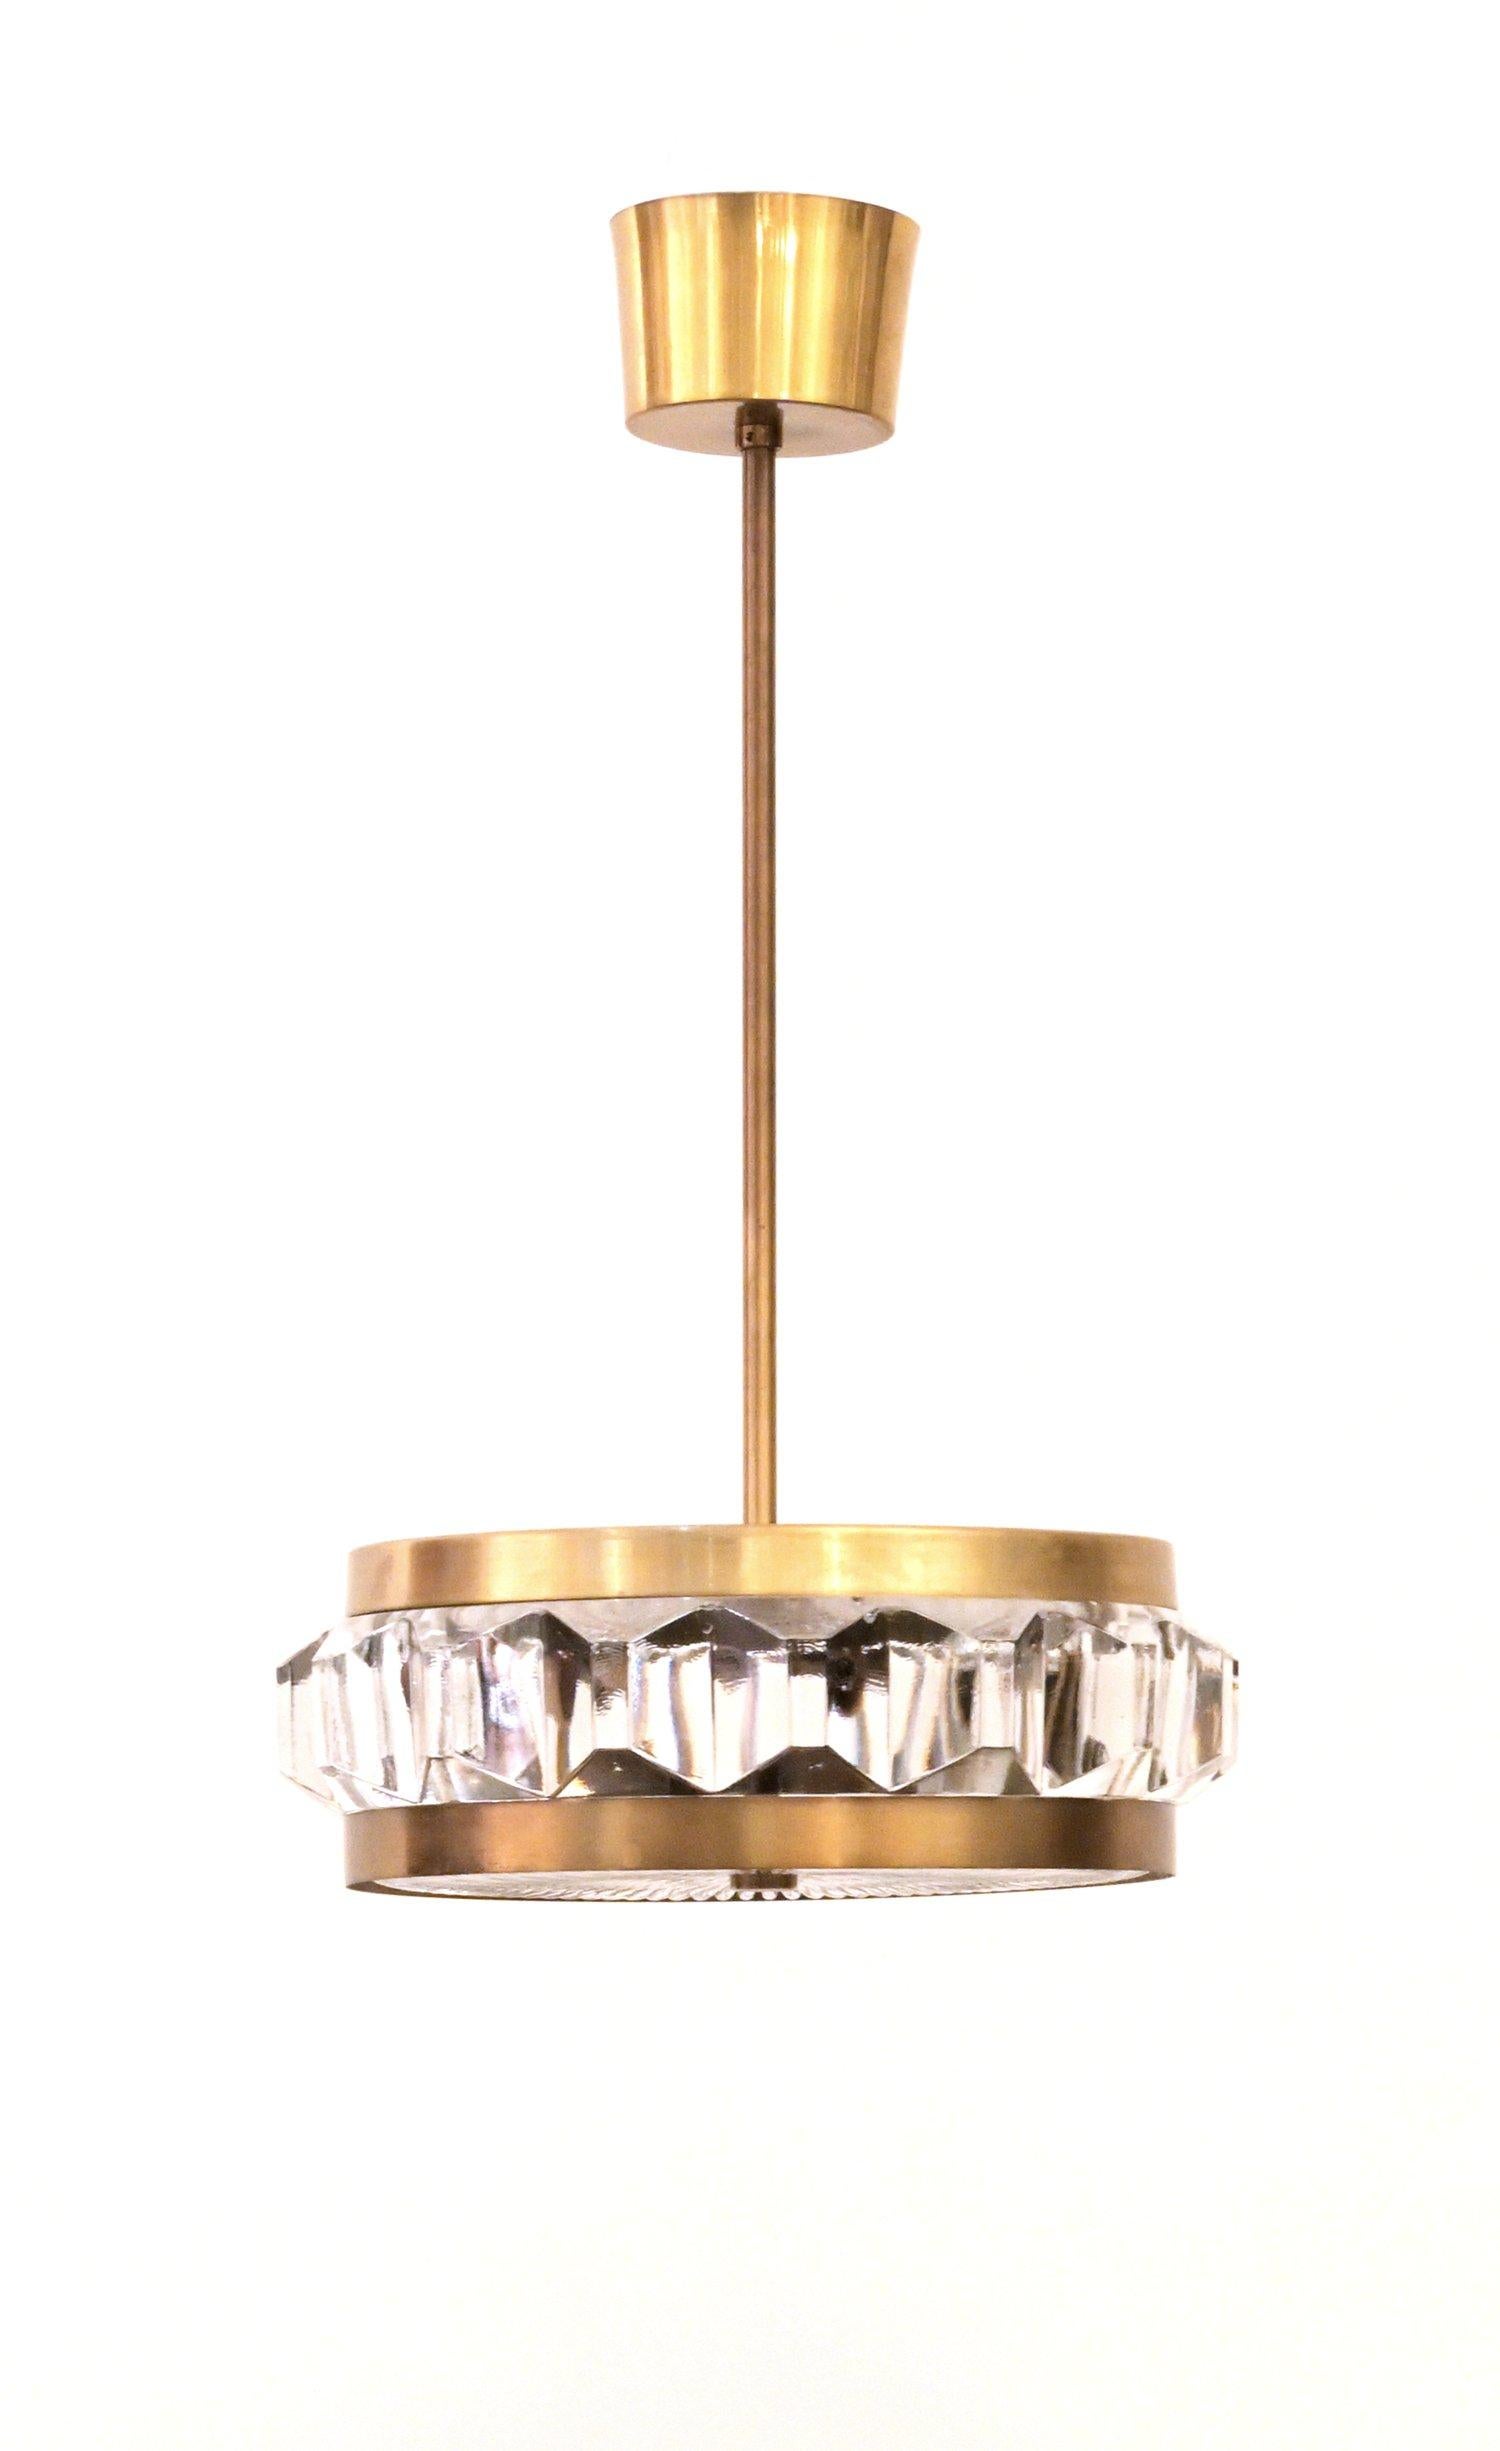 A brass pendant Orrefors light having cut geometric glass decorations in the center rim and an intricate glass detailed disc along the bottom. Contains two sockets. circa 1960s.

.